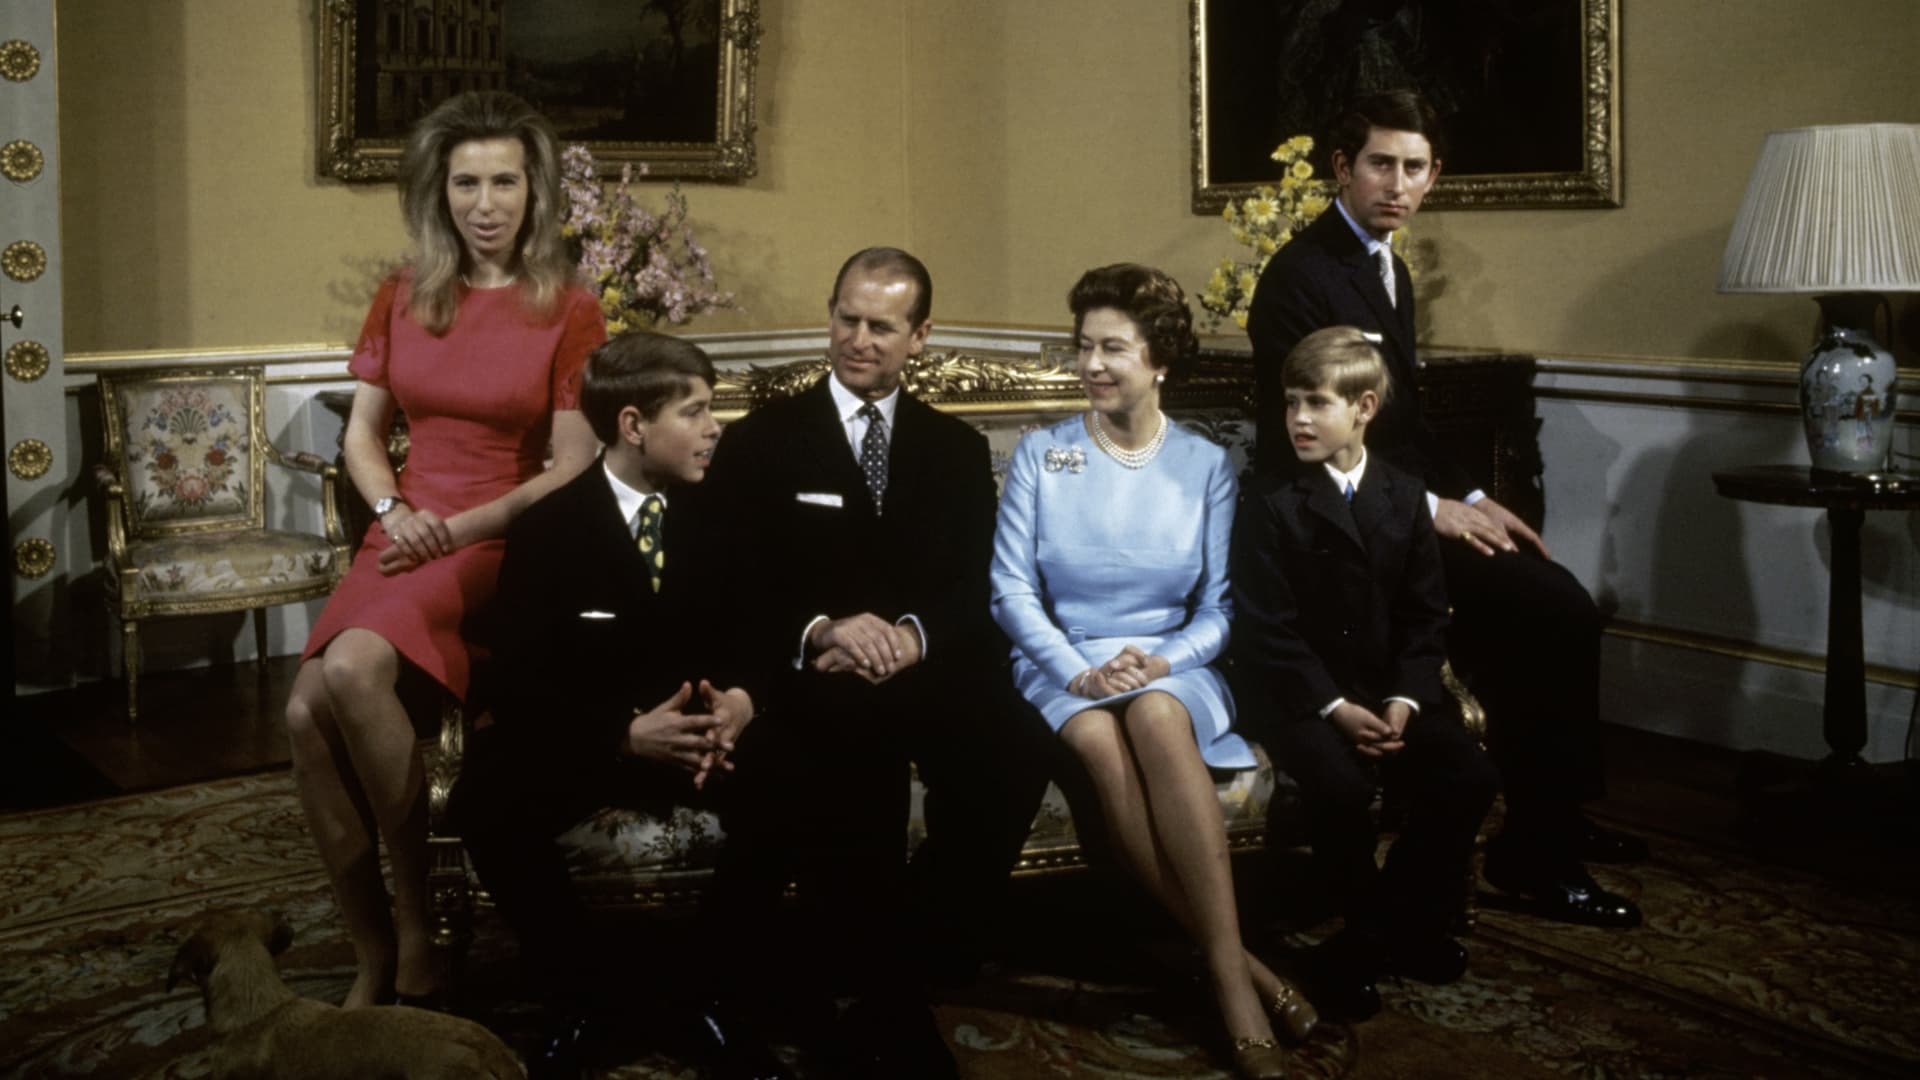 The royal family at Buckingham Palace, London, 1972. Left to right: Princess Anne, Prince Andrew, Prince Philip, Queen Elizabeth, Prince Edward and Prince Charles.